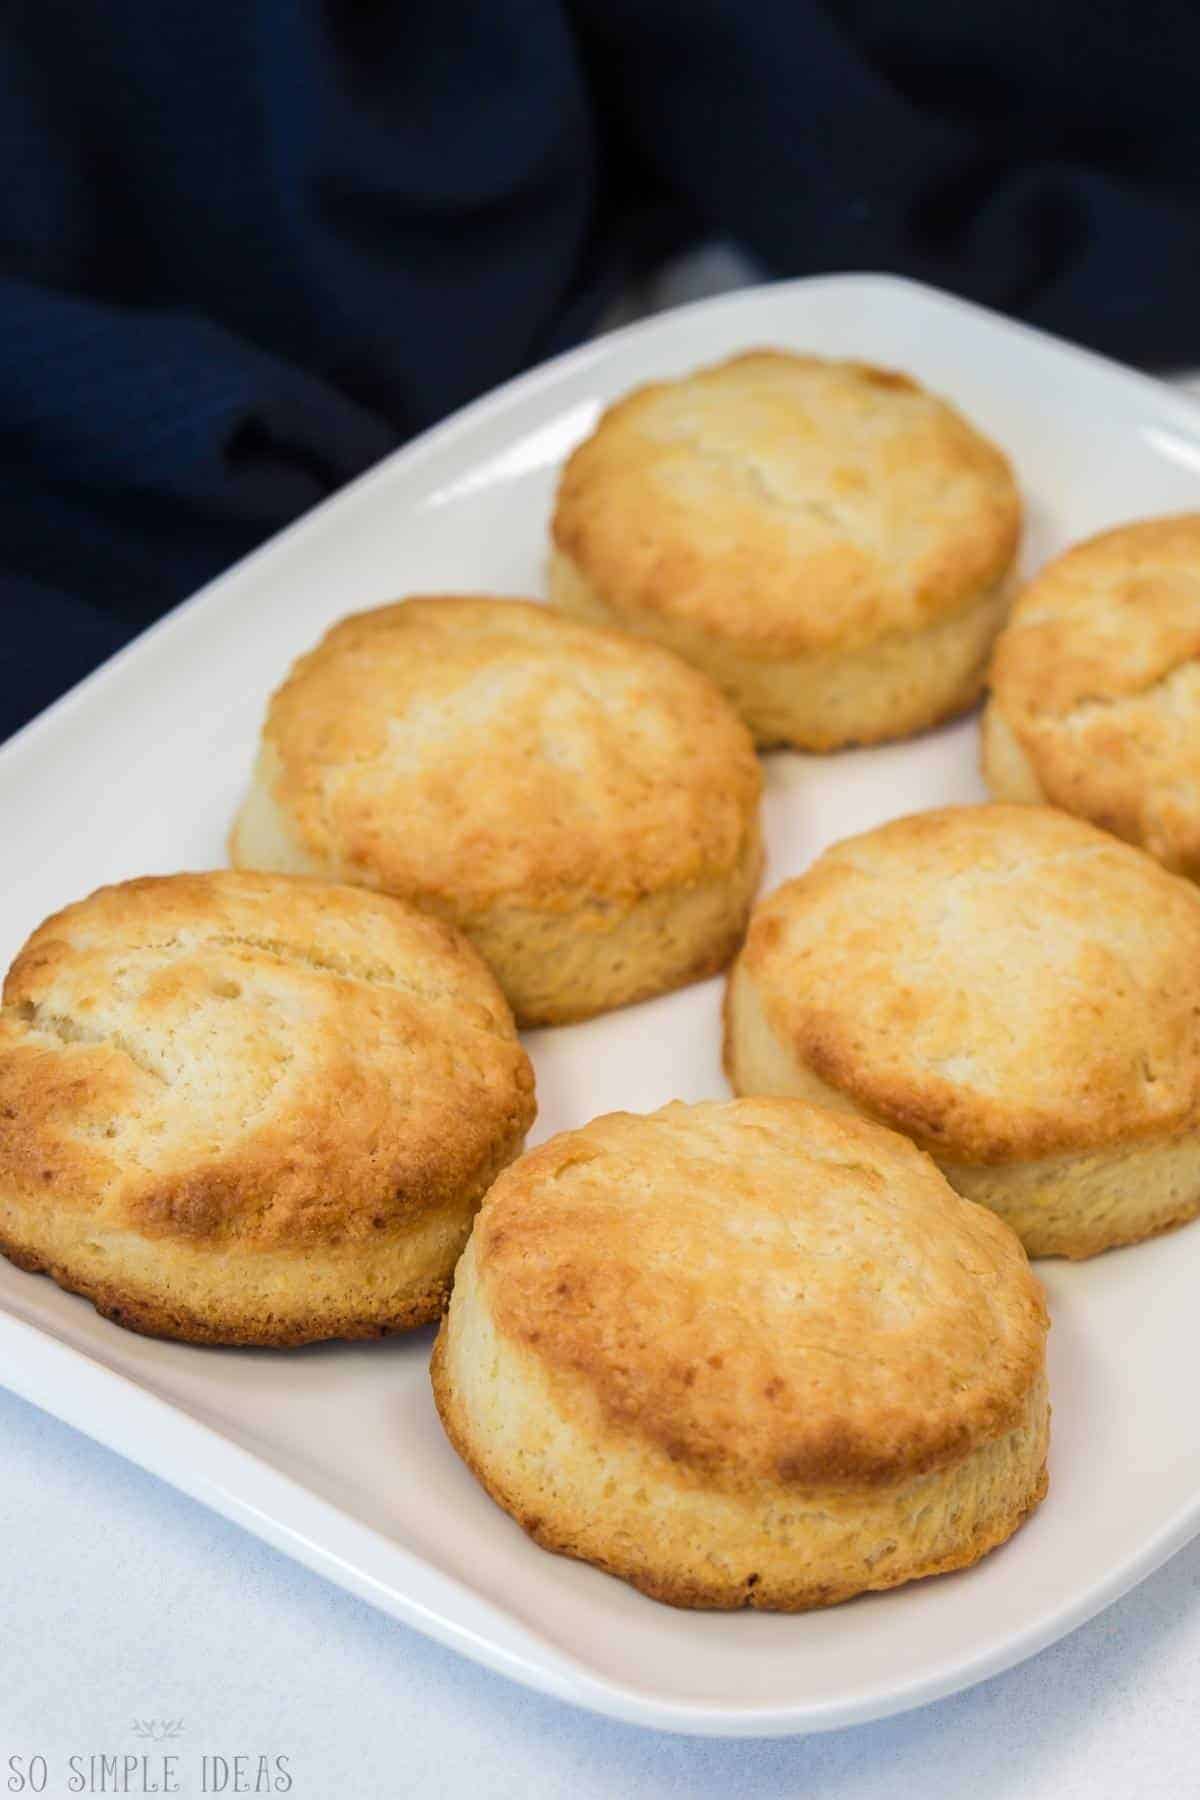 biscuits on white platter.